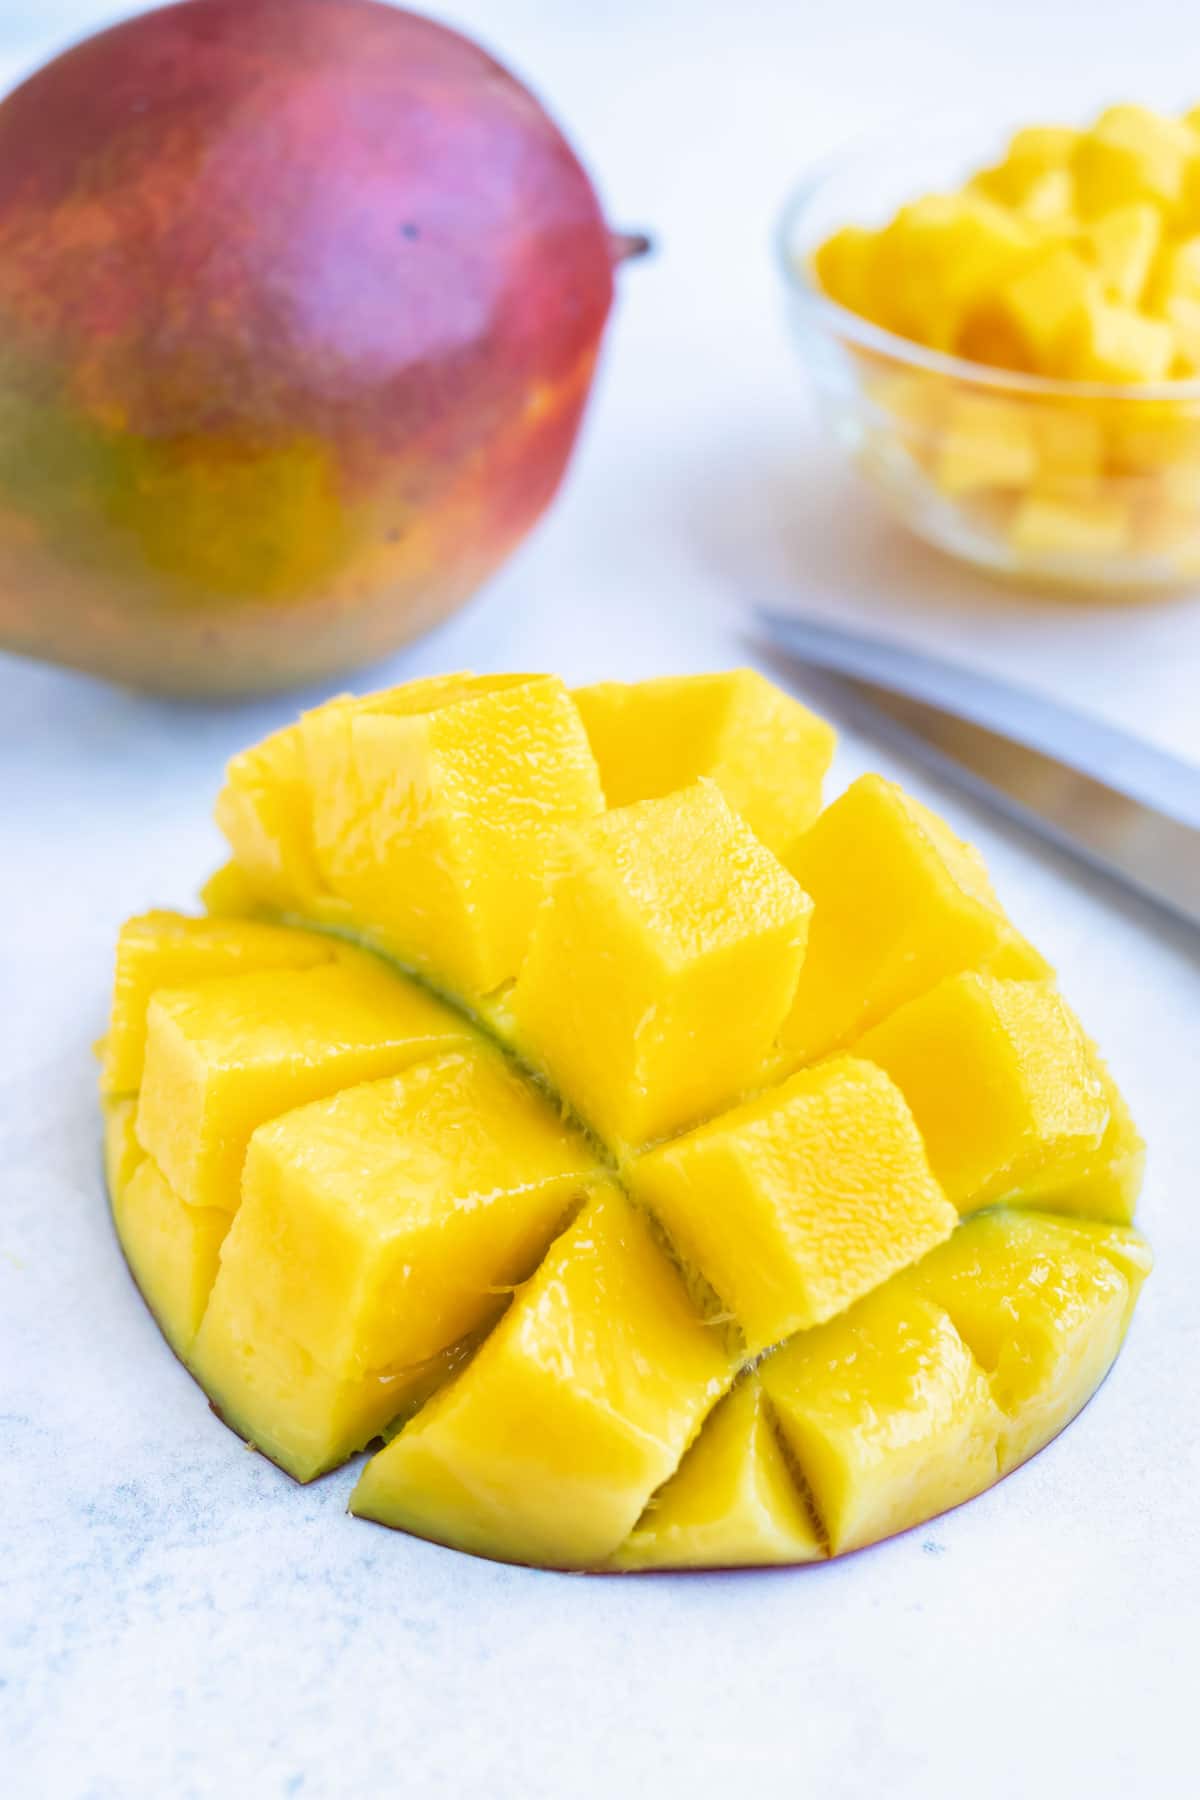 A mango half that has been cut into large chunks.